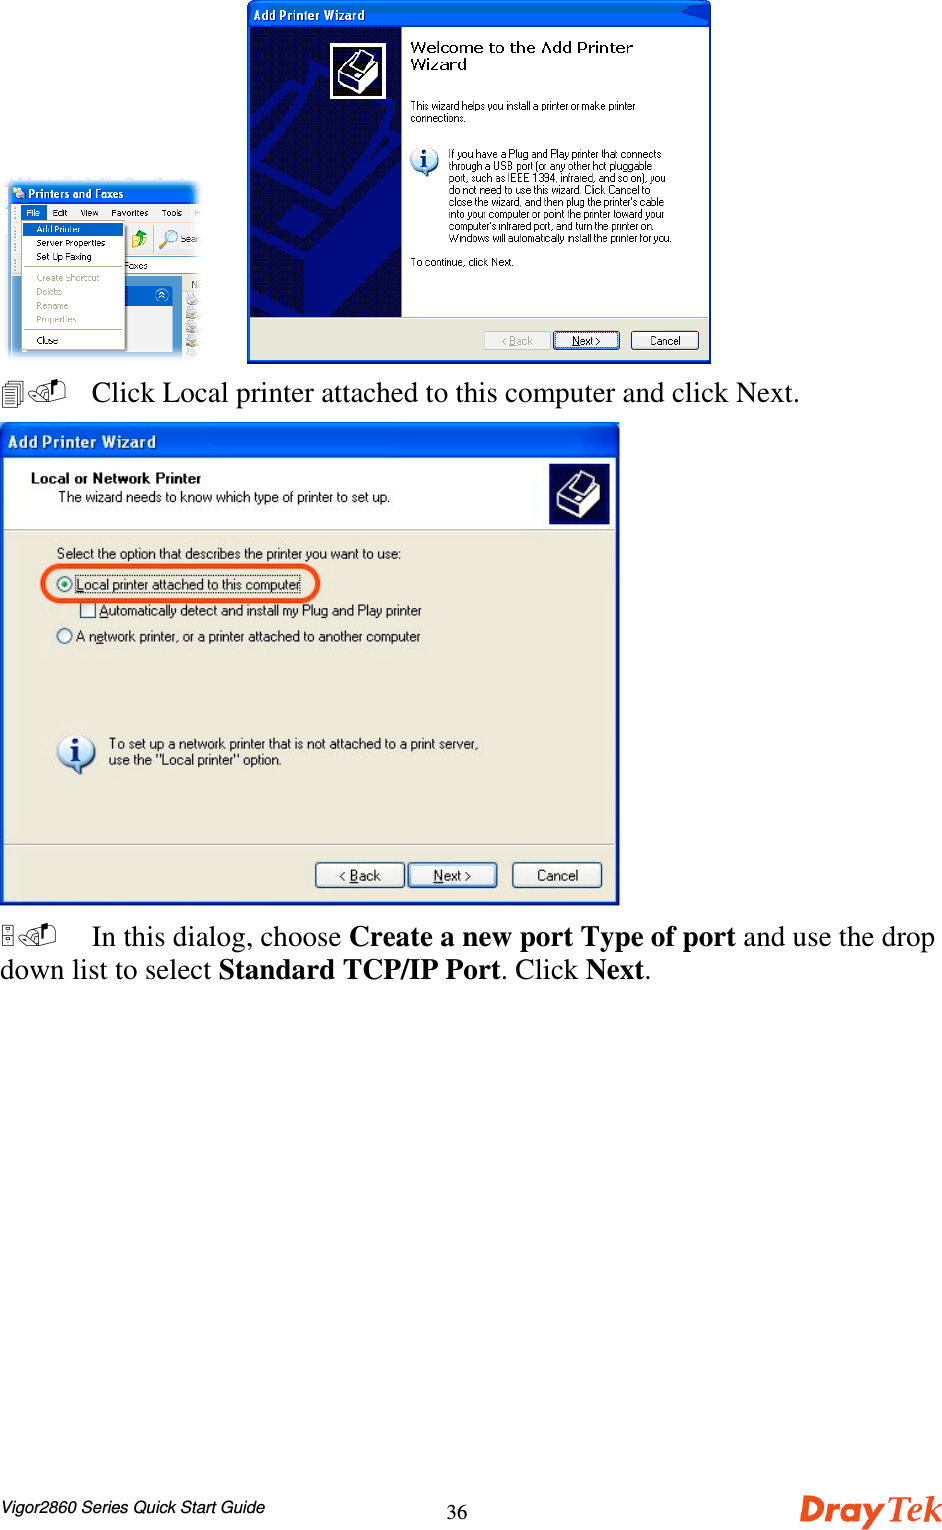 Vigor2860 Series Quick Start Guide36    Click Local printer attached to this computer and click Next. In this dialog, choose Create a new port Type of port and use the dropdown list to select Standard TCP/IP Port. Click Next.